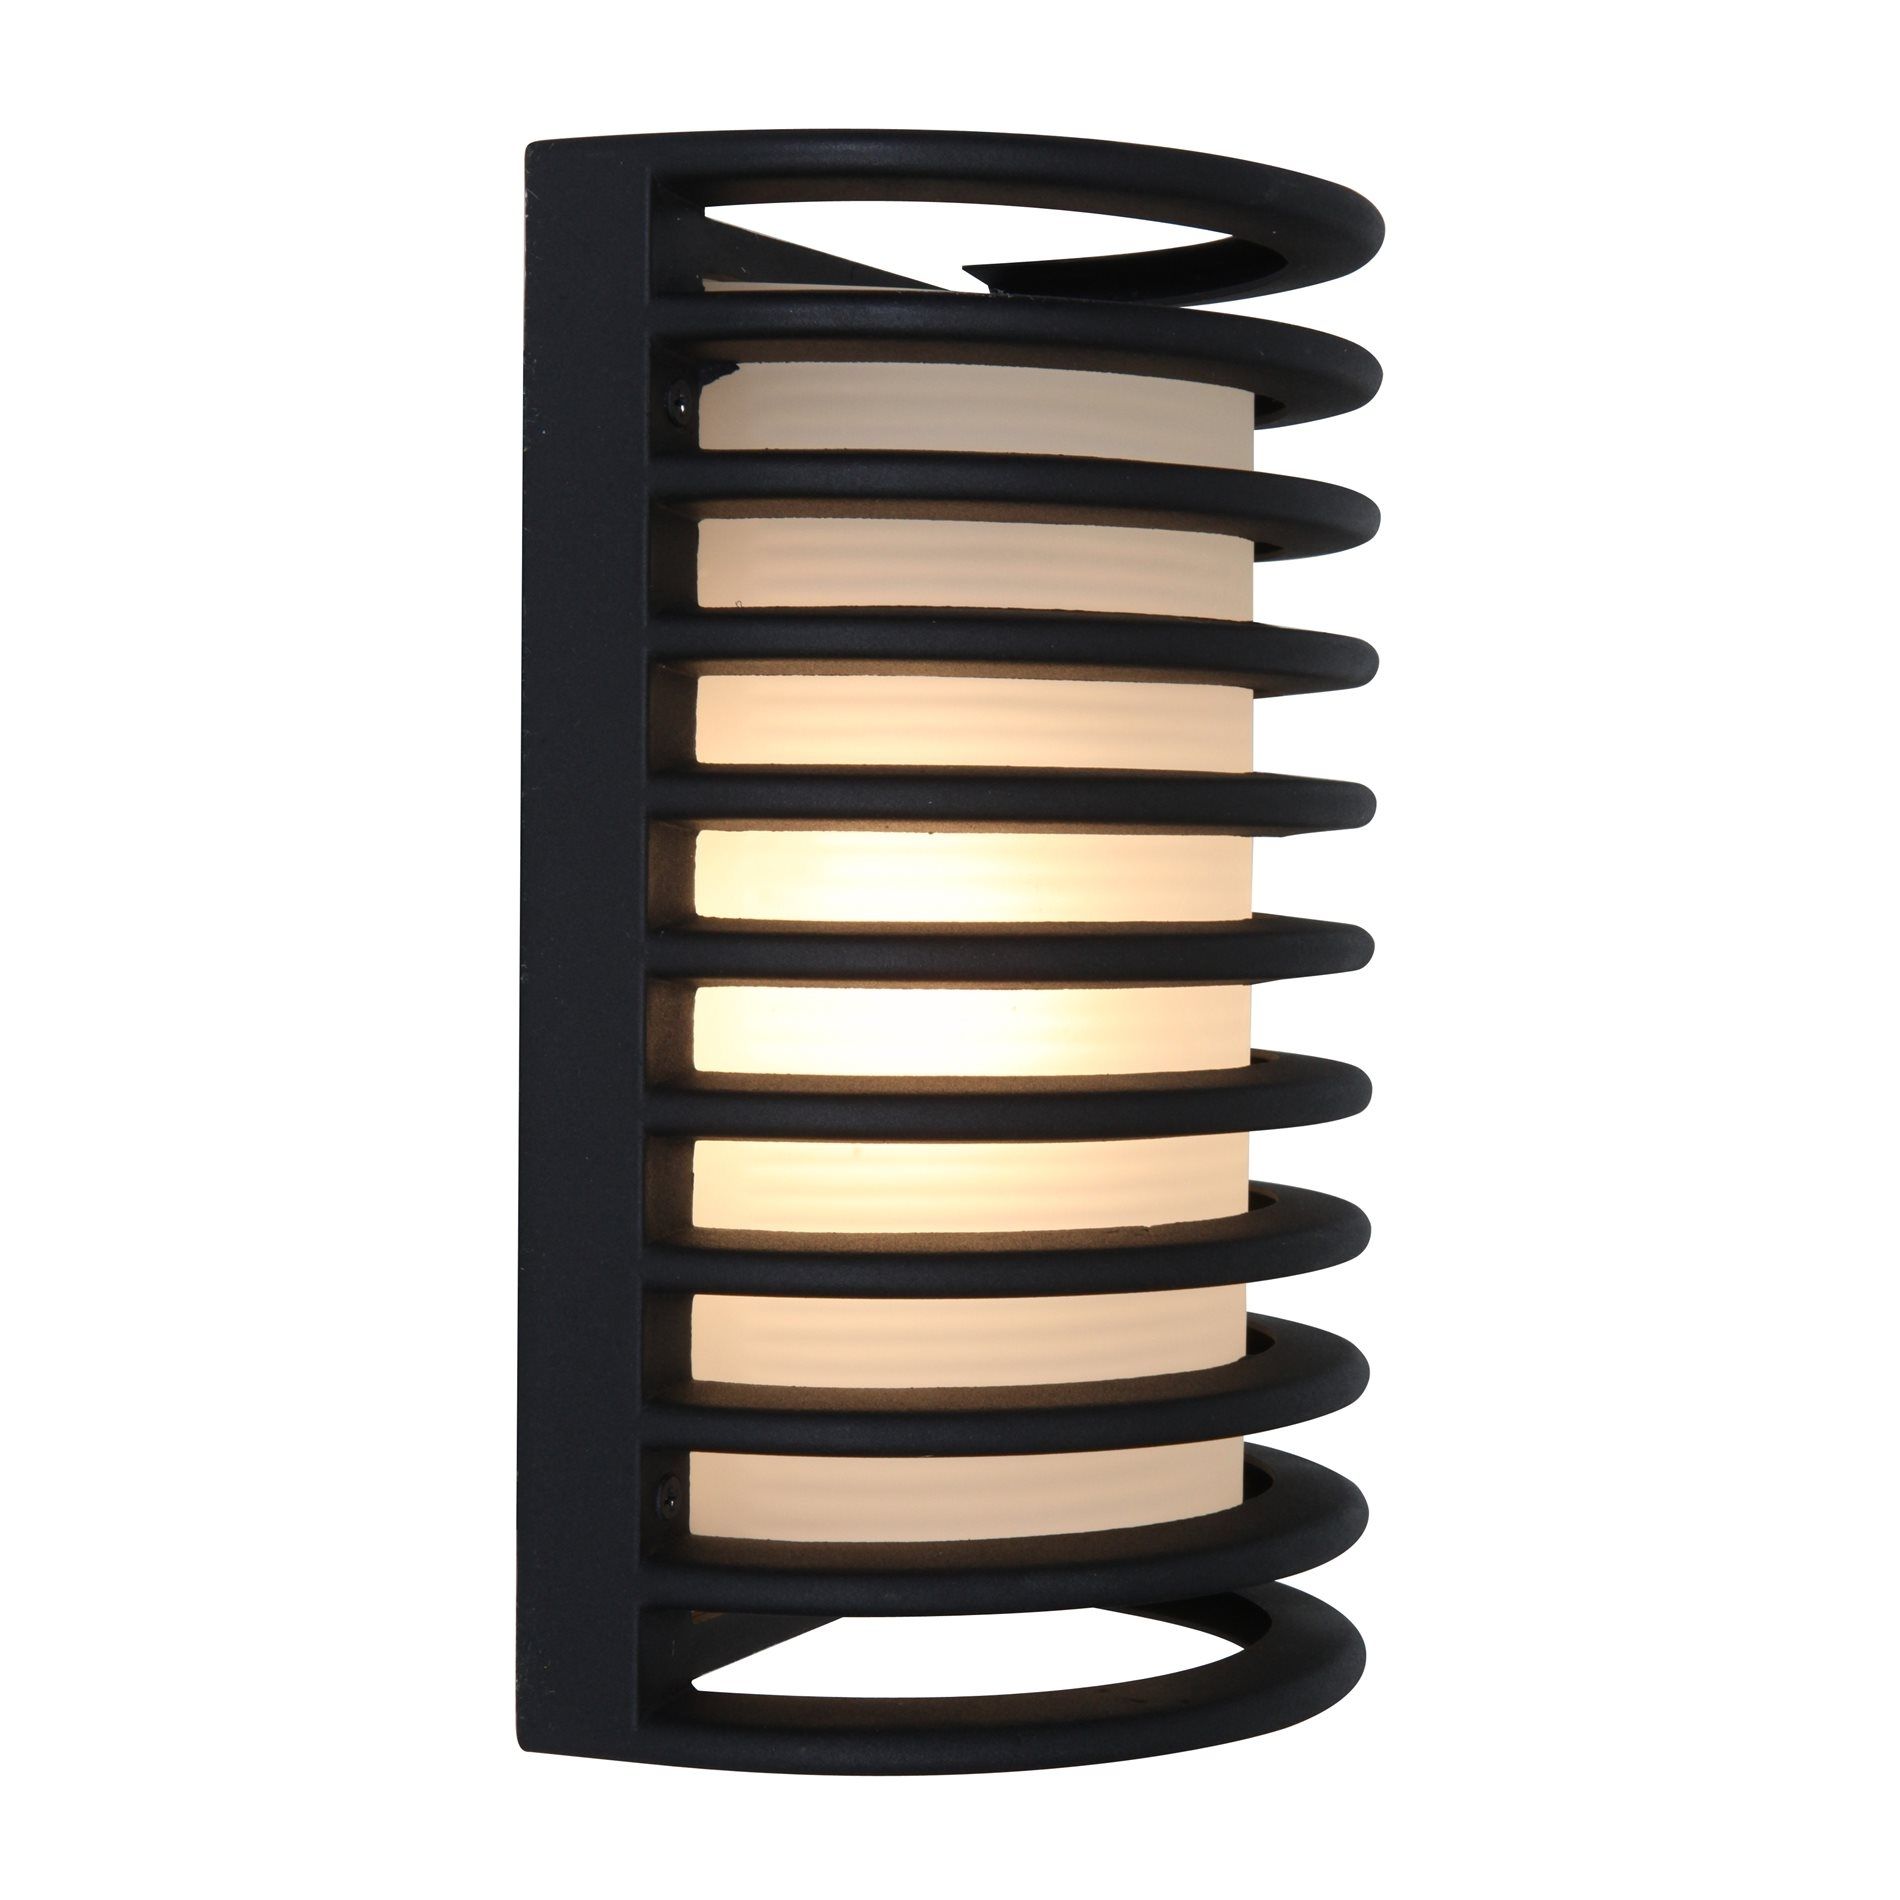 Contemporary Outdoor Wall Light Black – Outdoor Designs With Black Contemporary Outdoor Wall Lighting (View 14 of 15)